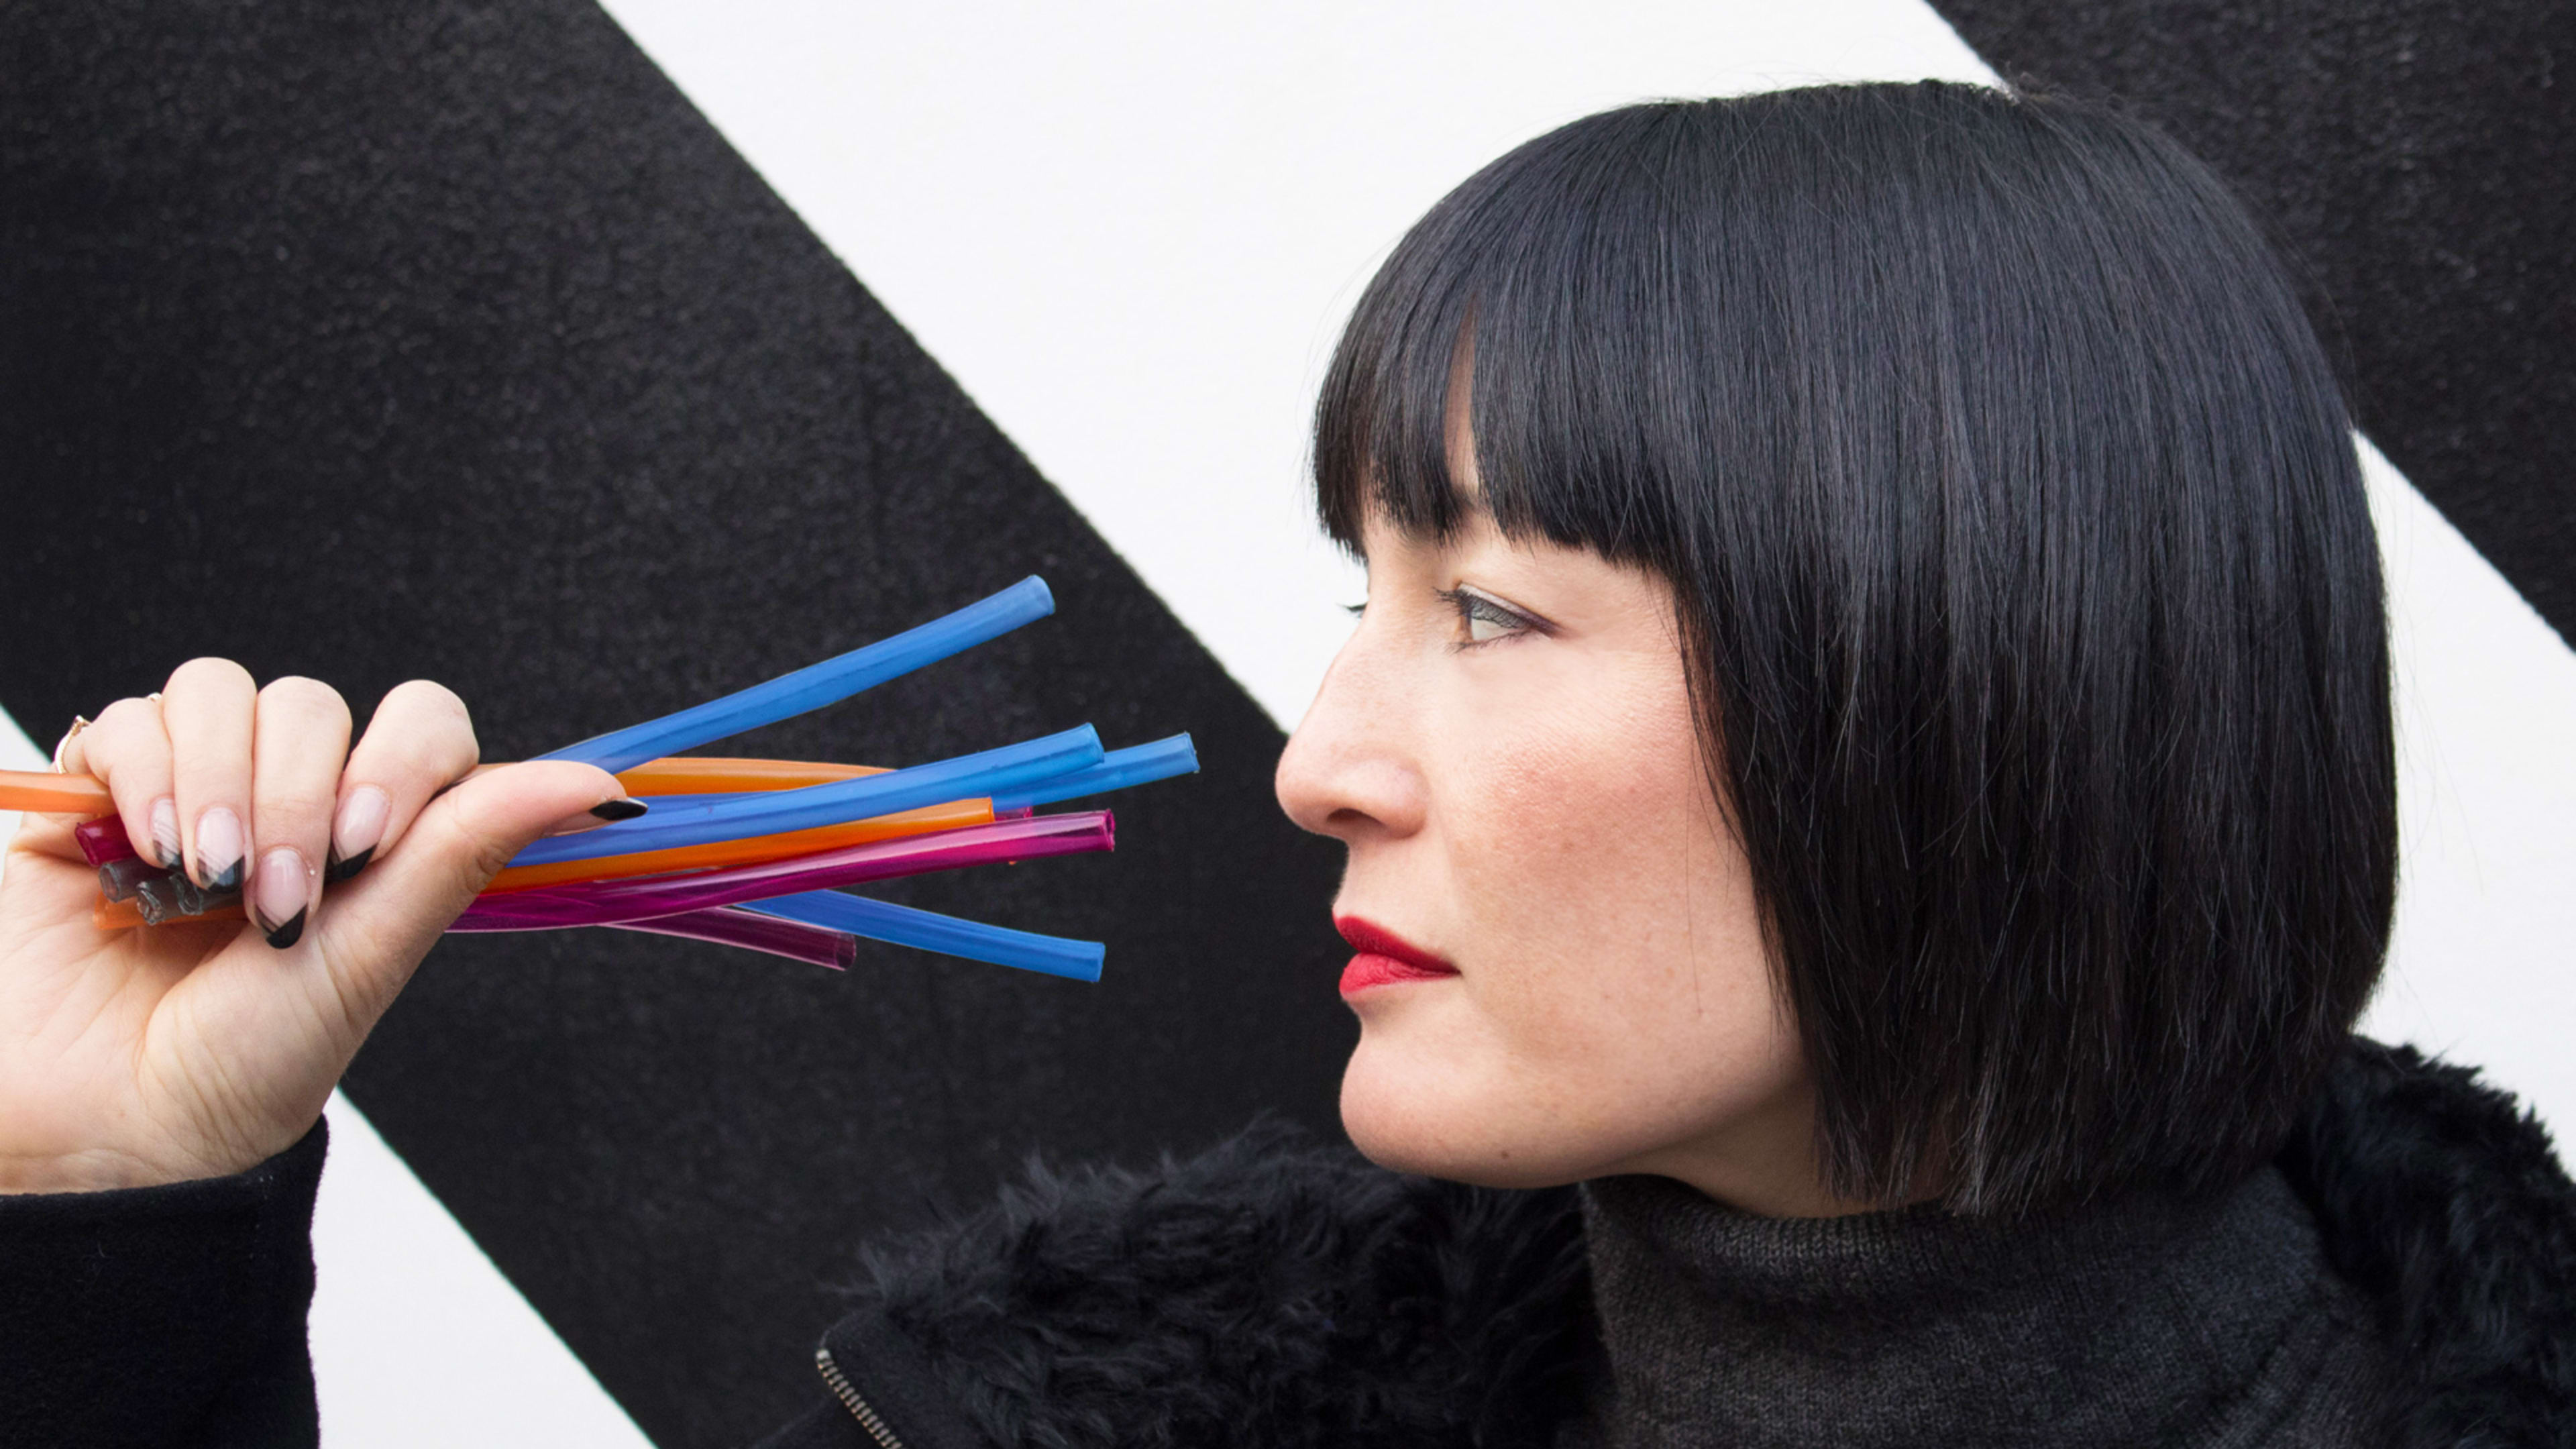 After You Finish Your Drink, You Can Eat This New Edible Straw